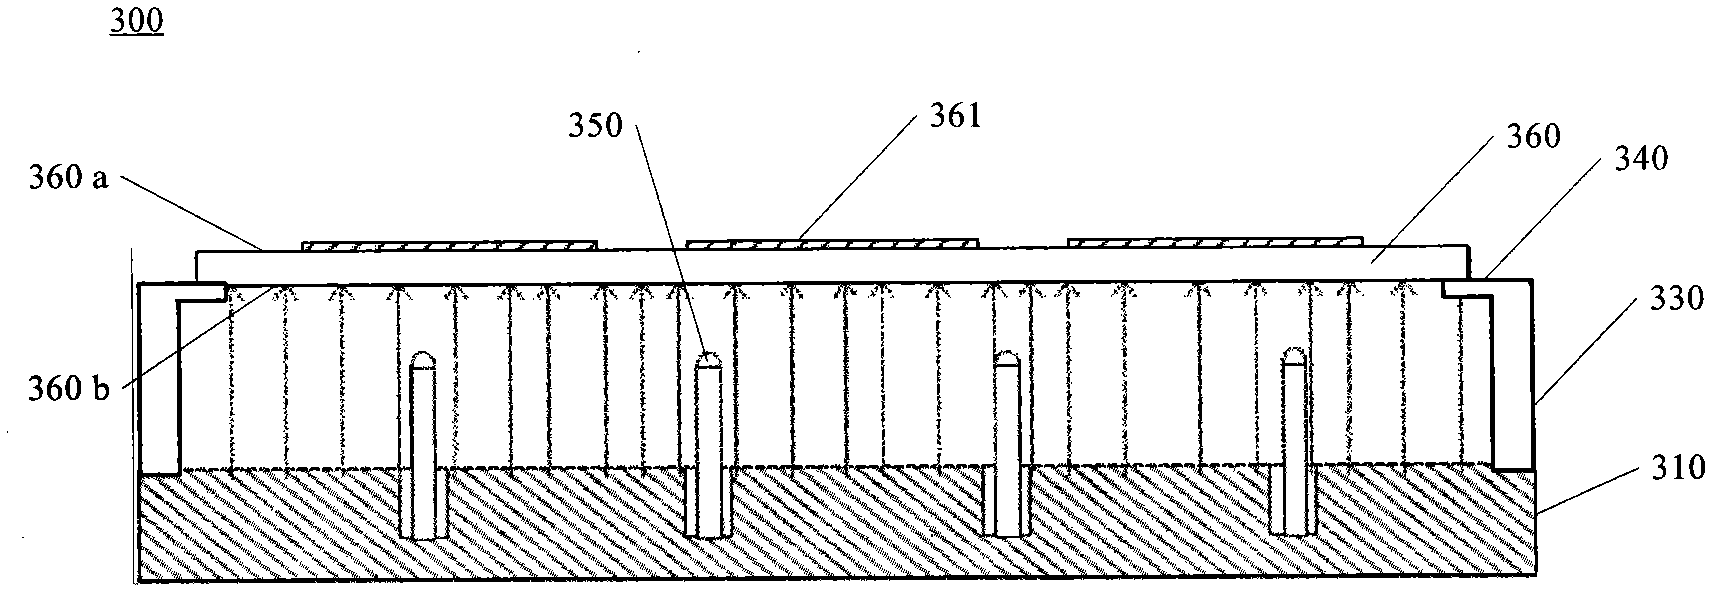 Alignment film drying device and method